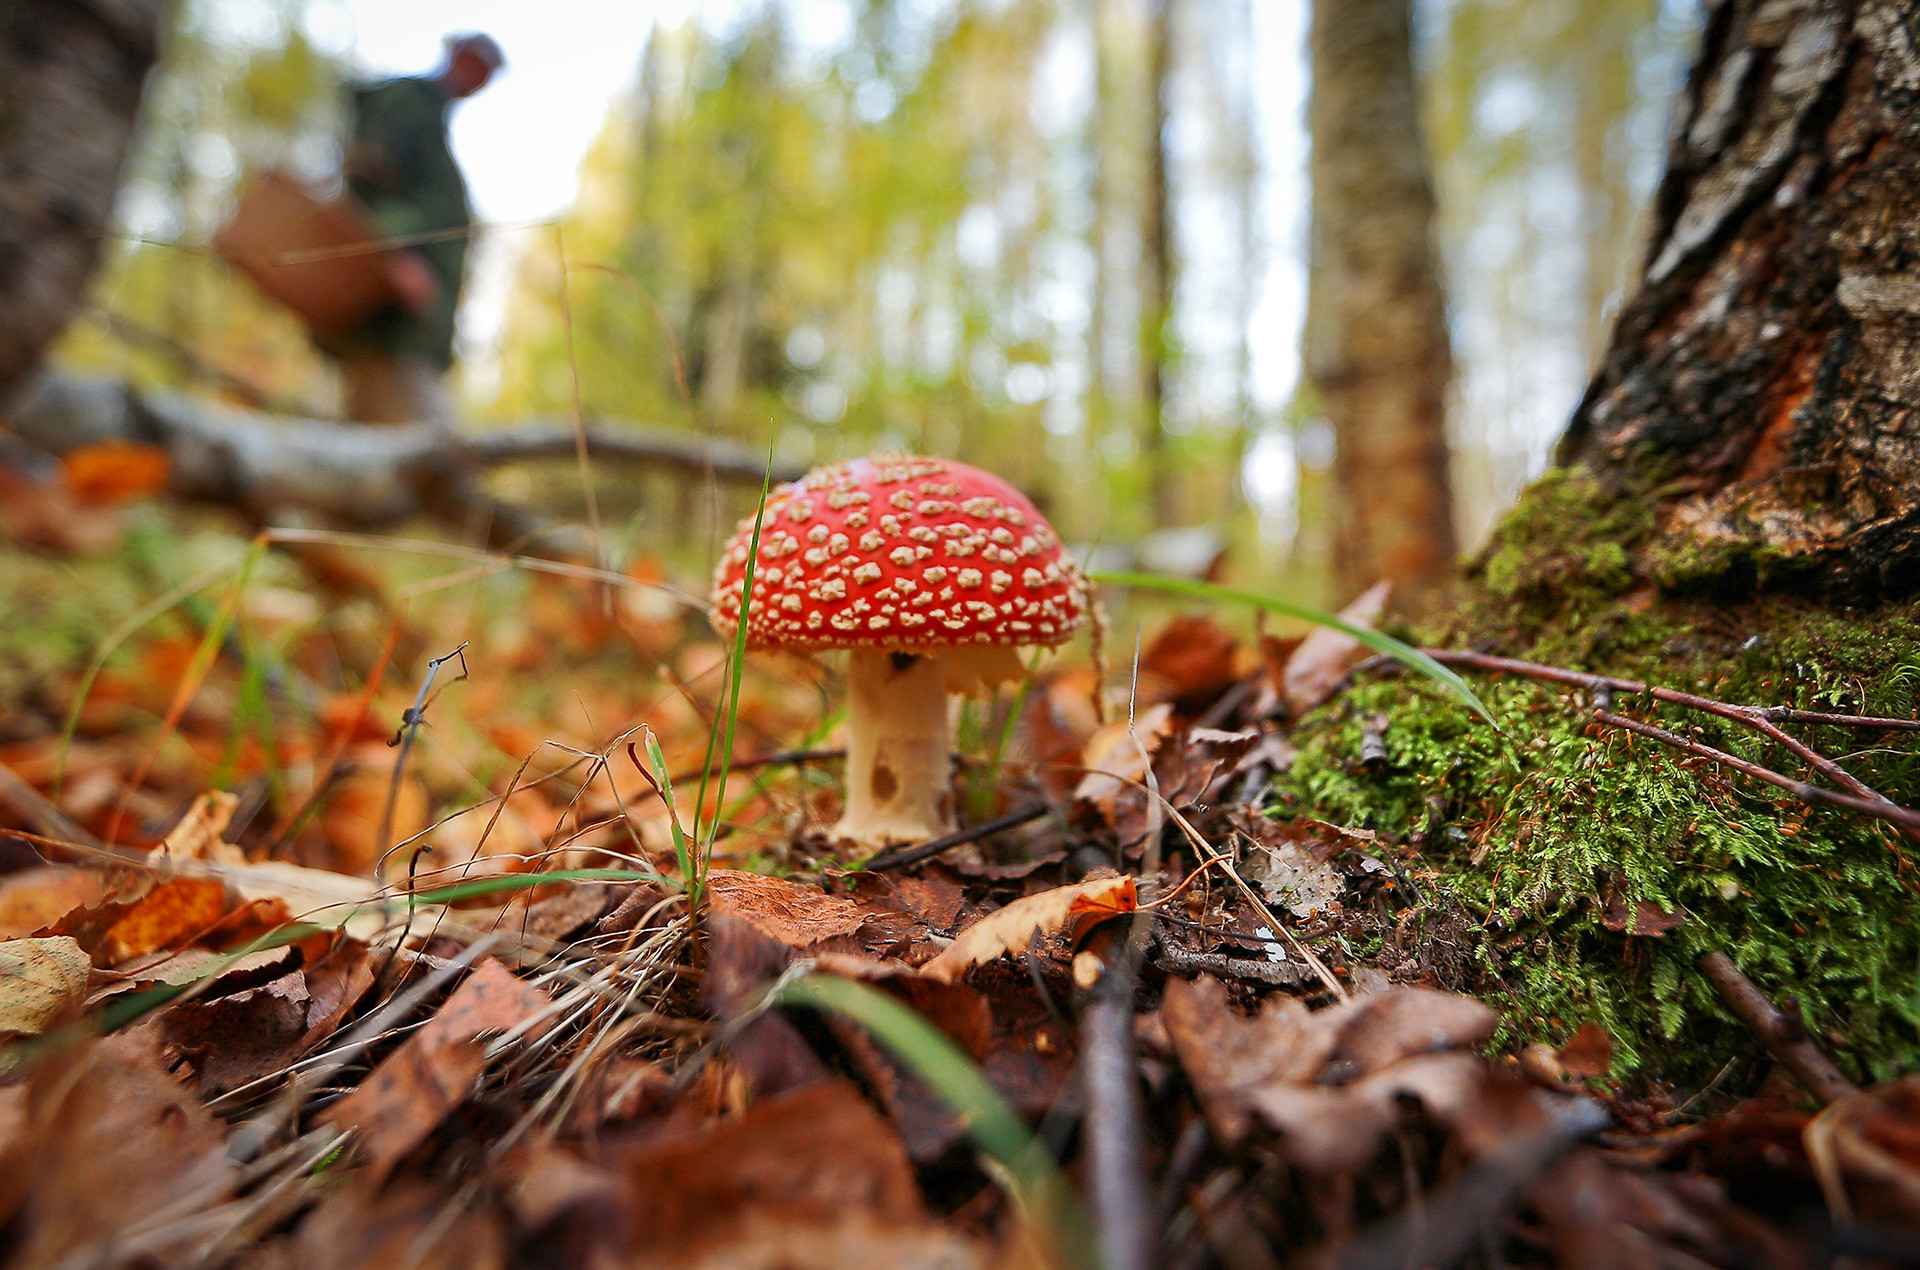 Fly agaric, one of the most poisonous kinds of mushrooms in Russia. Do not eat it!